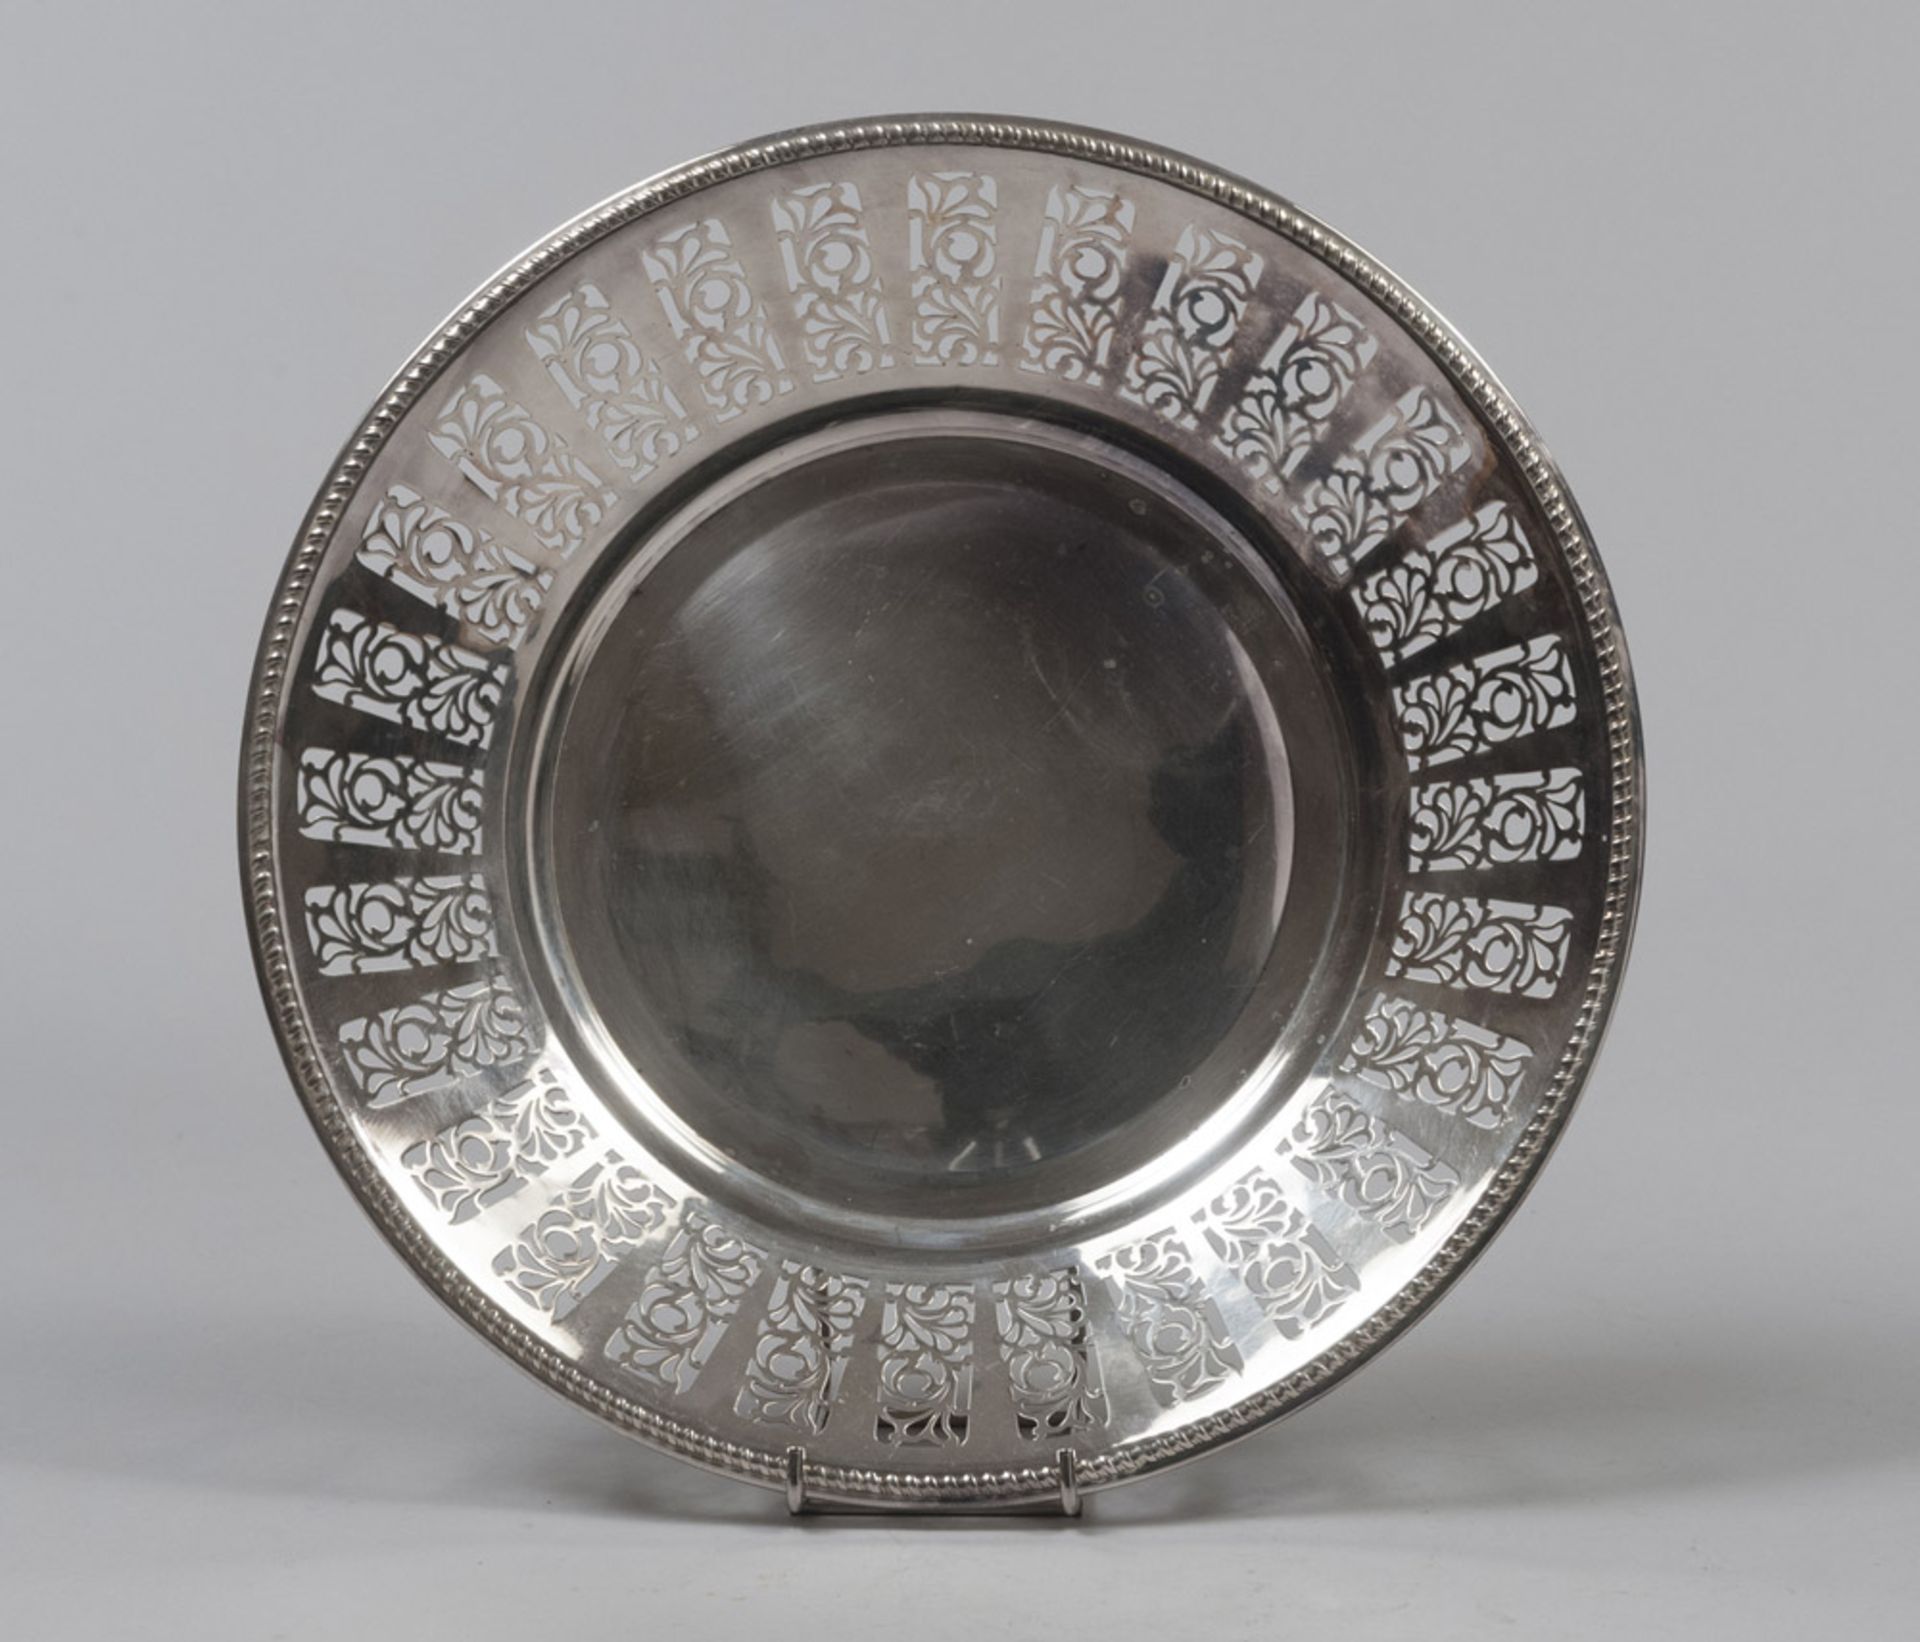 SILVER CENTERPIECE, 20TH CENTURY with edge pierced to leaves. Measures cm. 4,5 x 31, weight gr. 427.